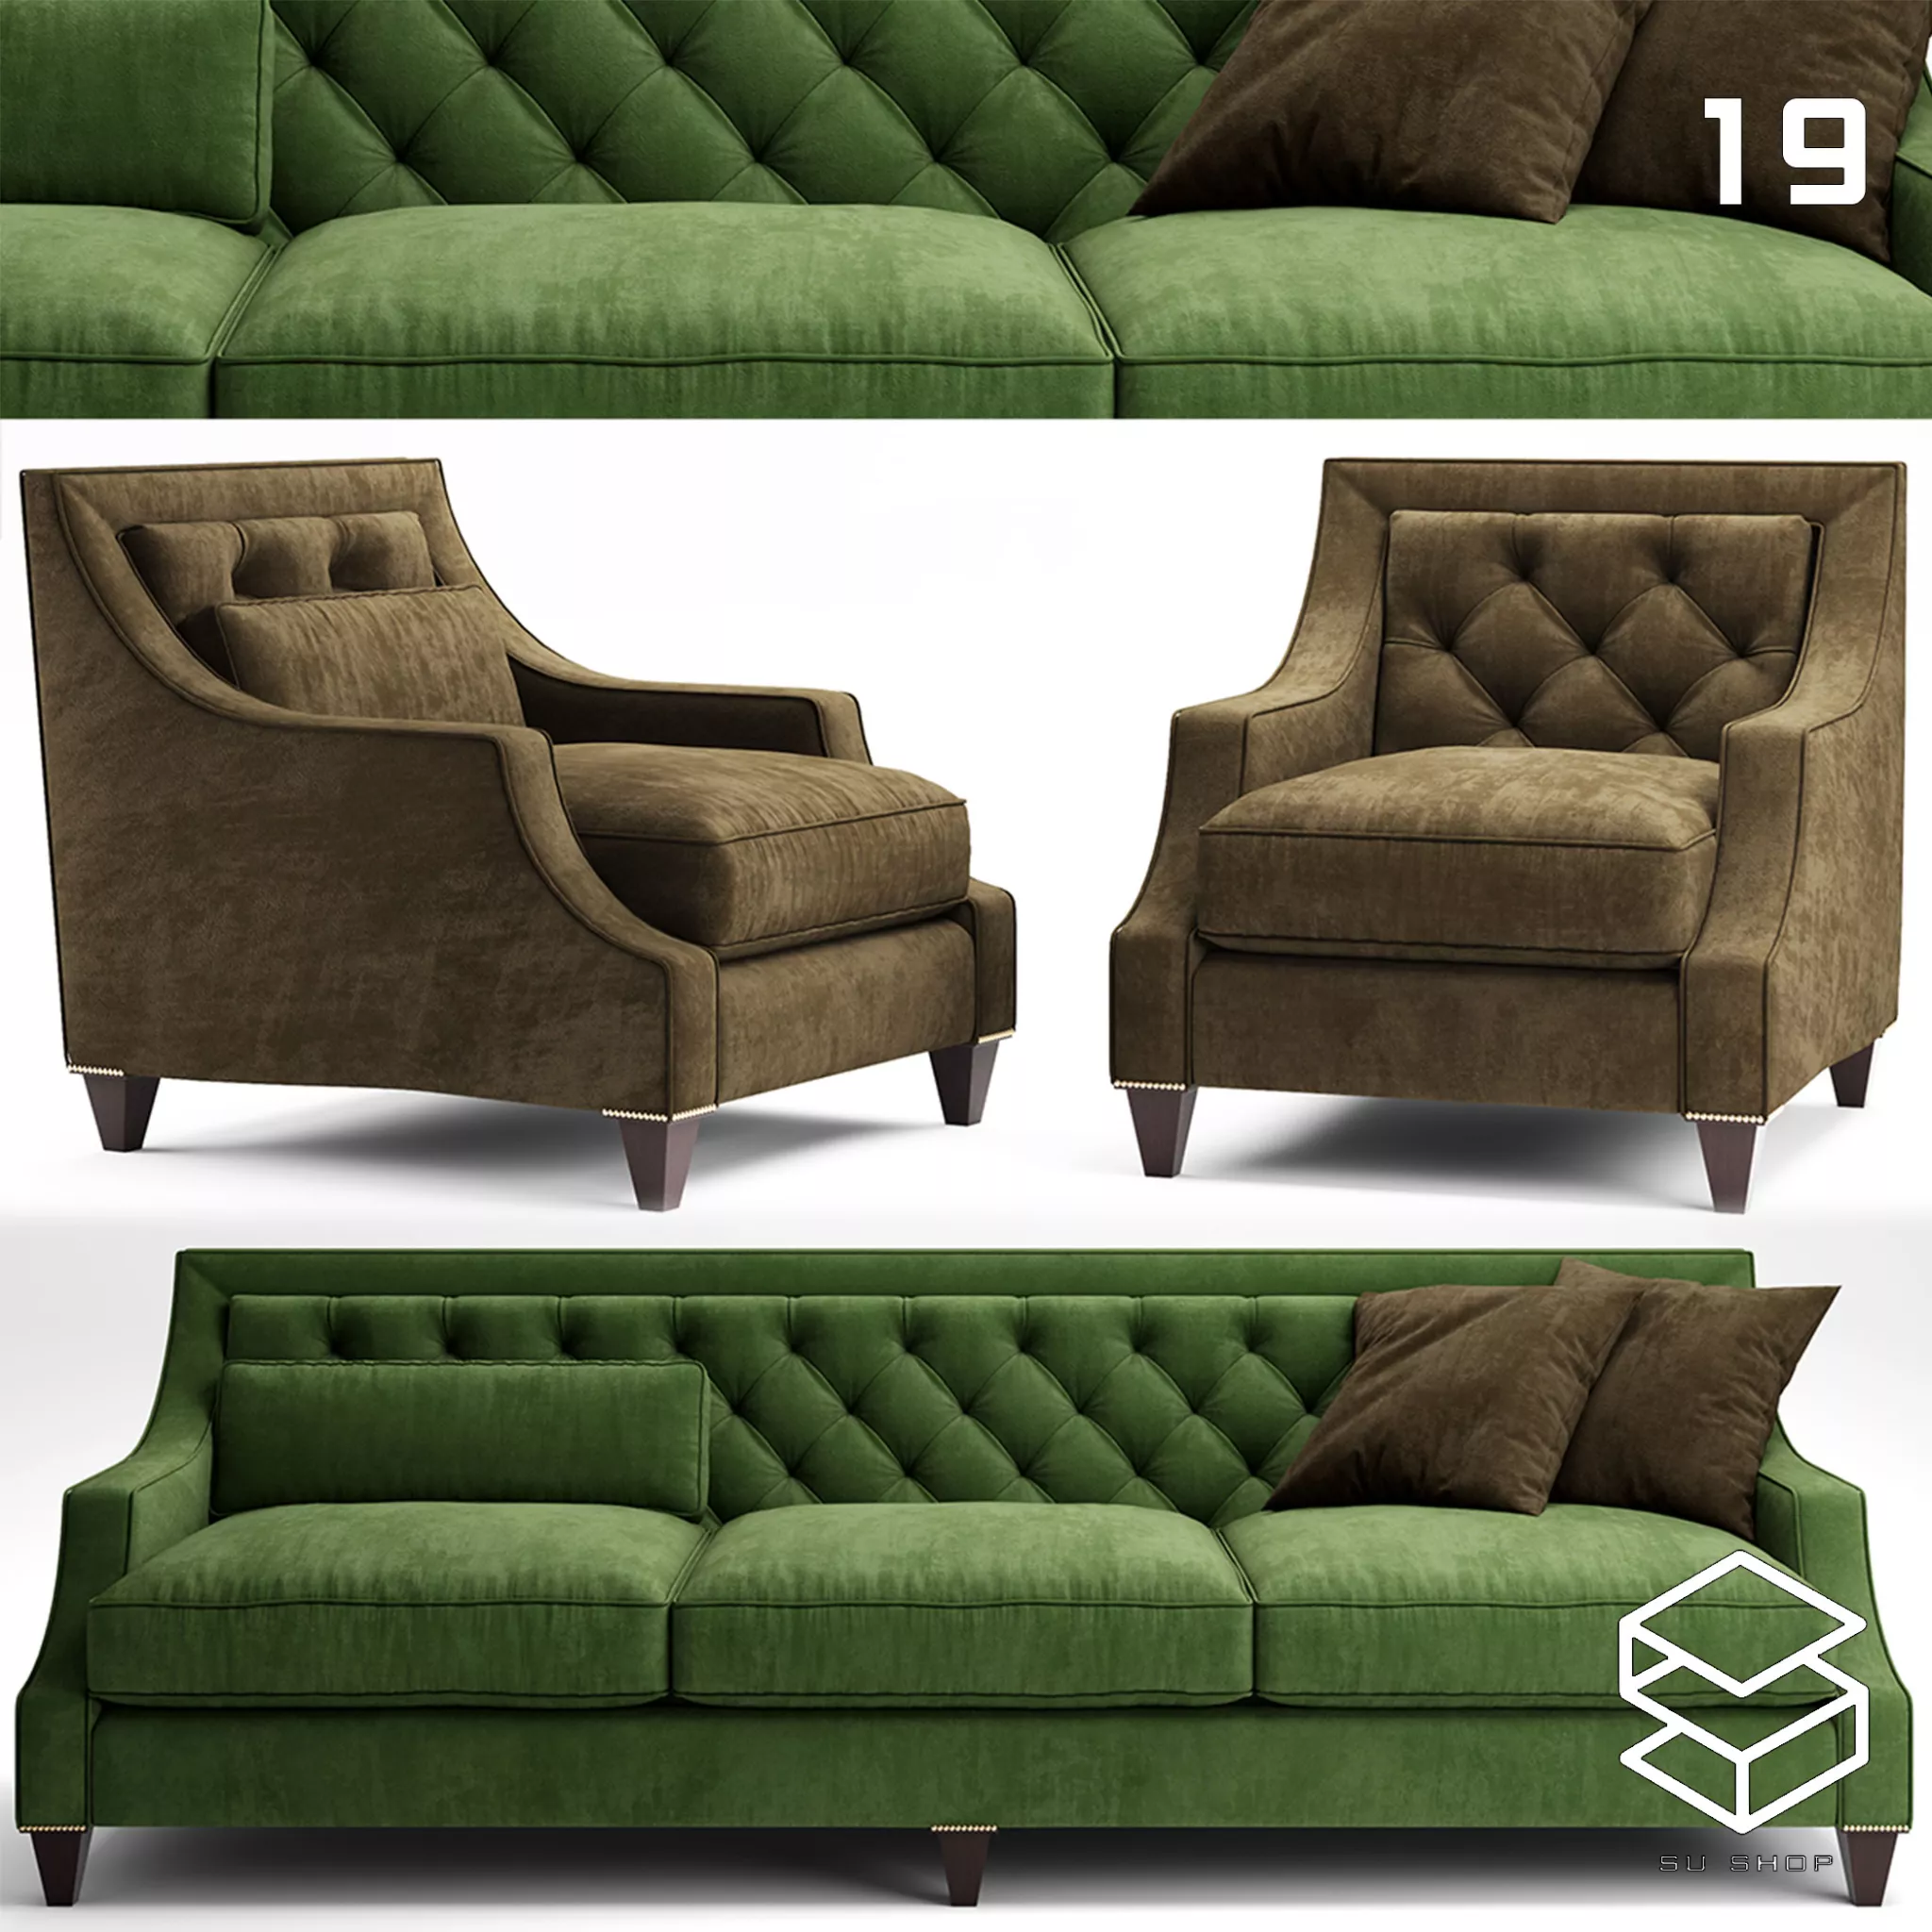 MODERN SOFA - SKETCHUP 3D MODEL - VRAY OR ENSCAPE - ID13485